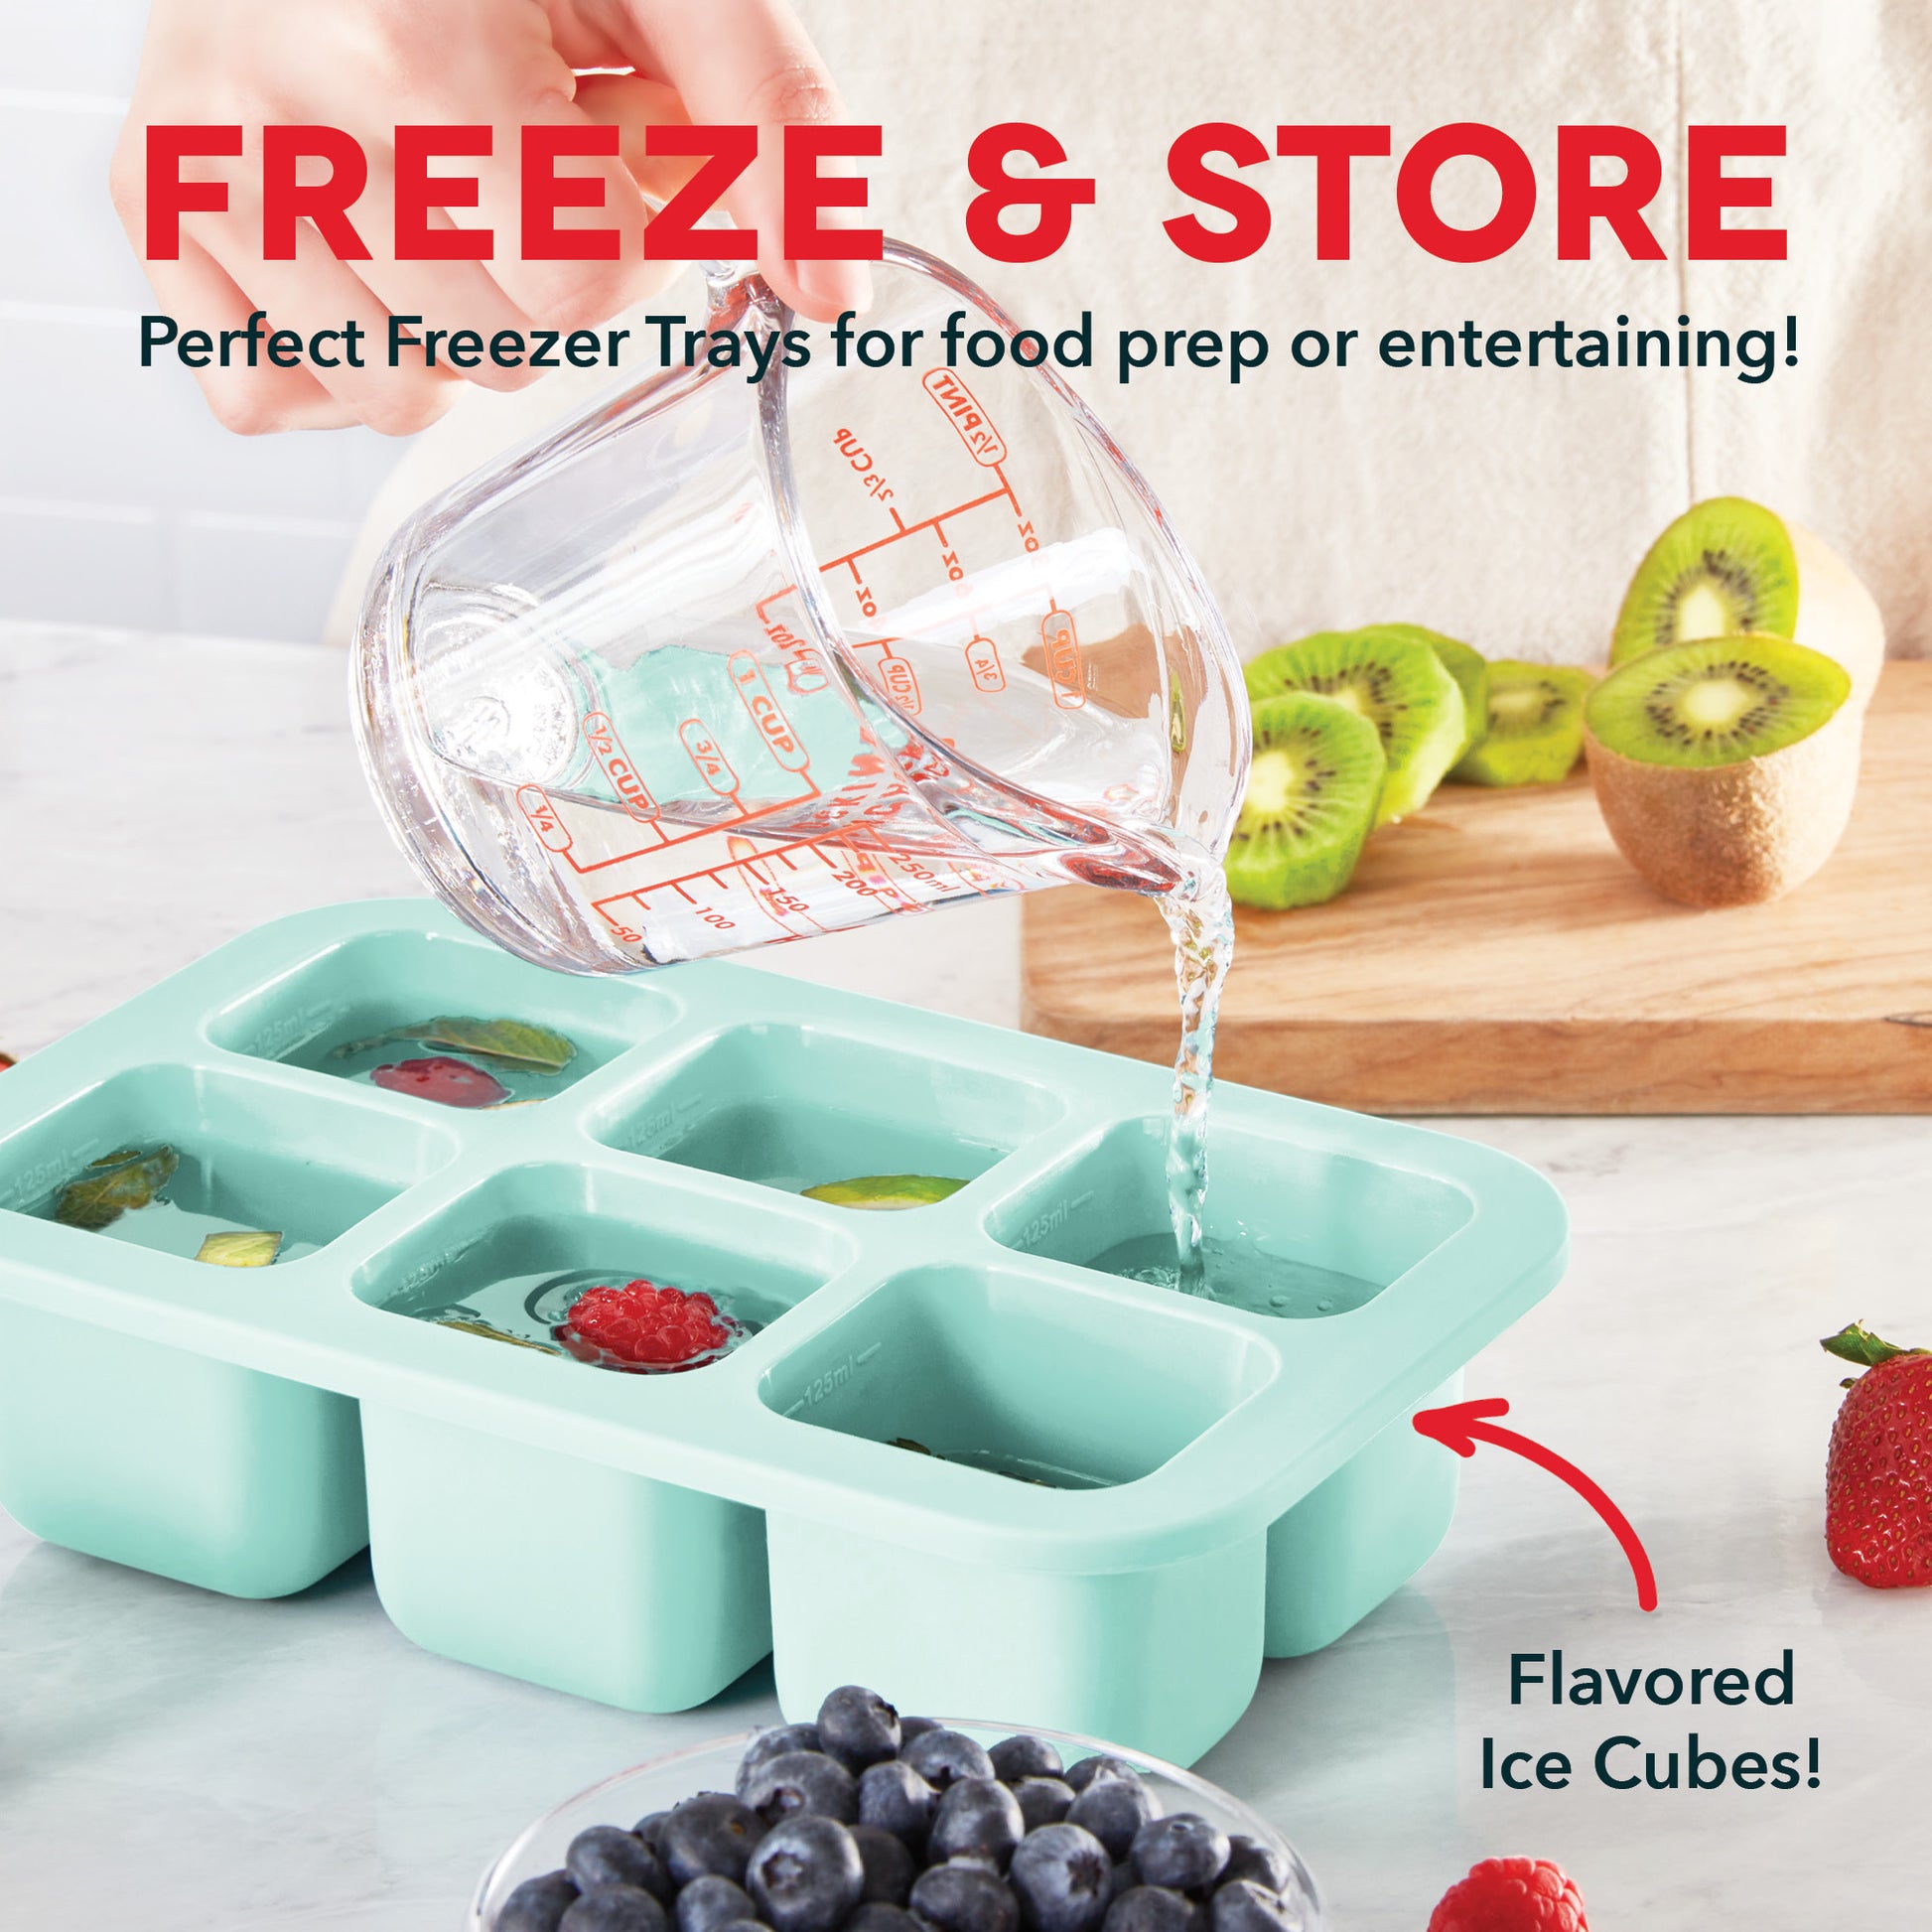 Top 5 Best Ice Cube Tray for Baby Food, 2021 Reviews